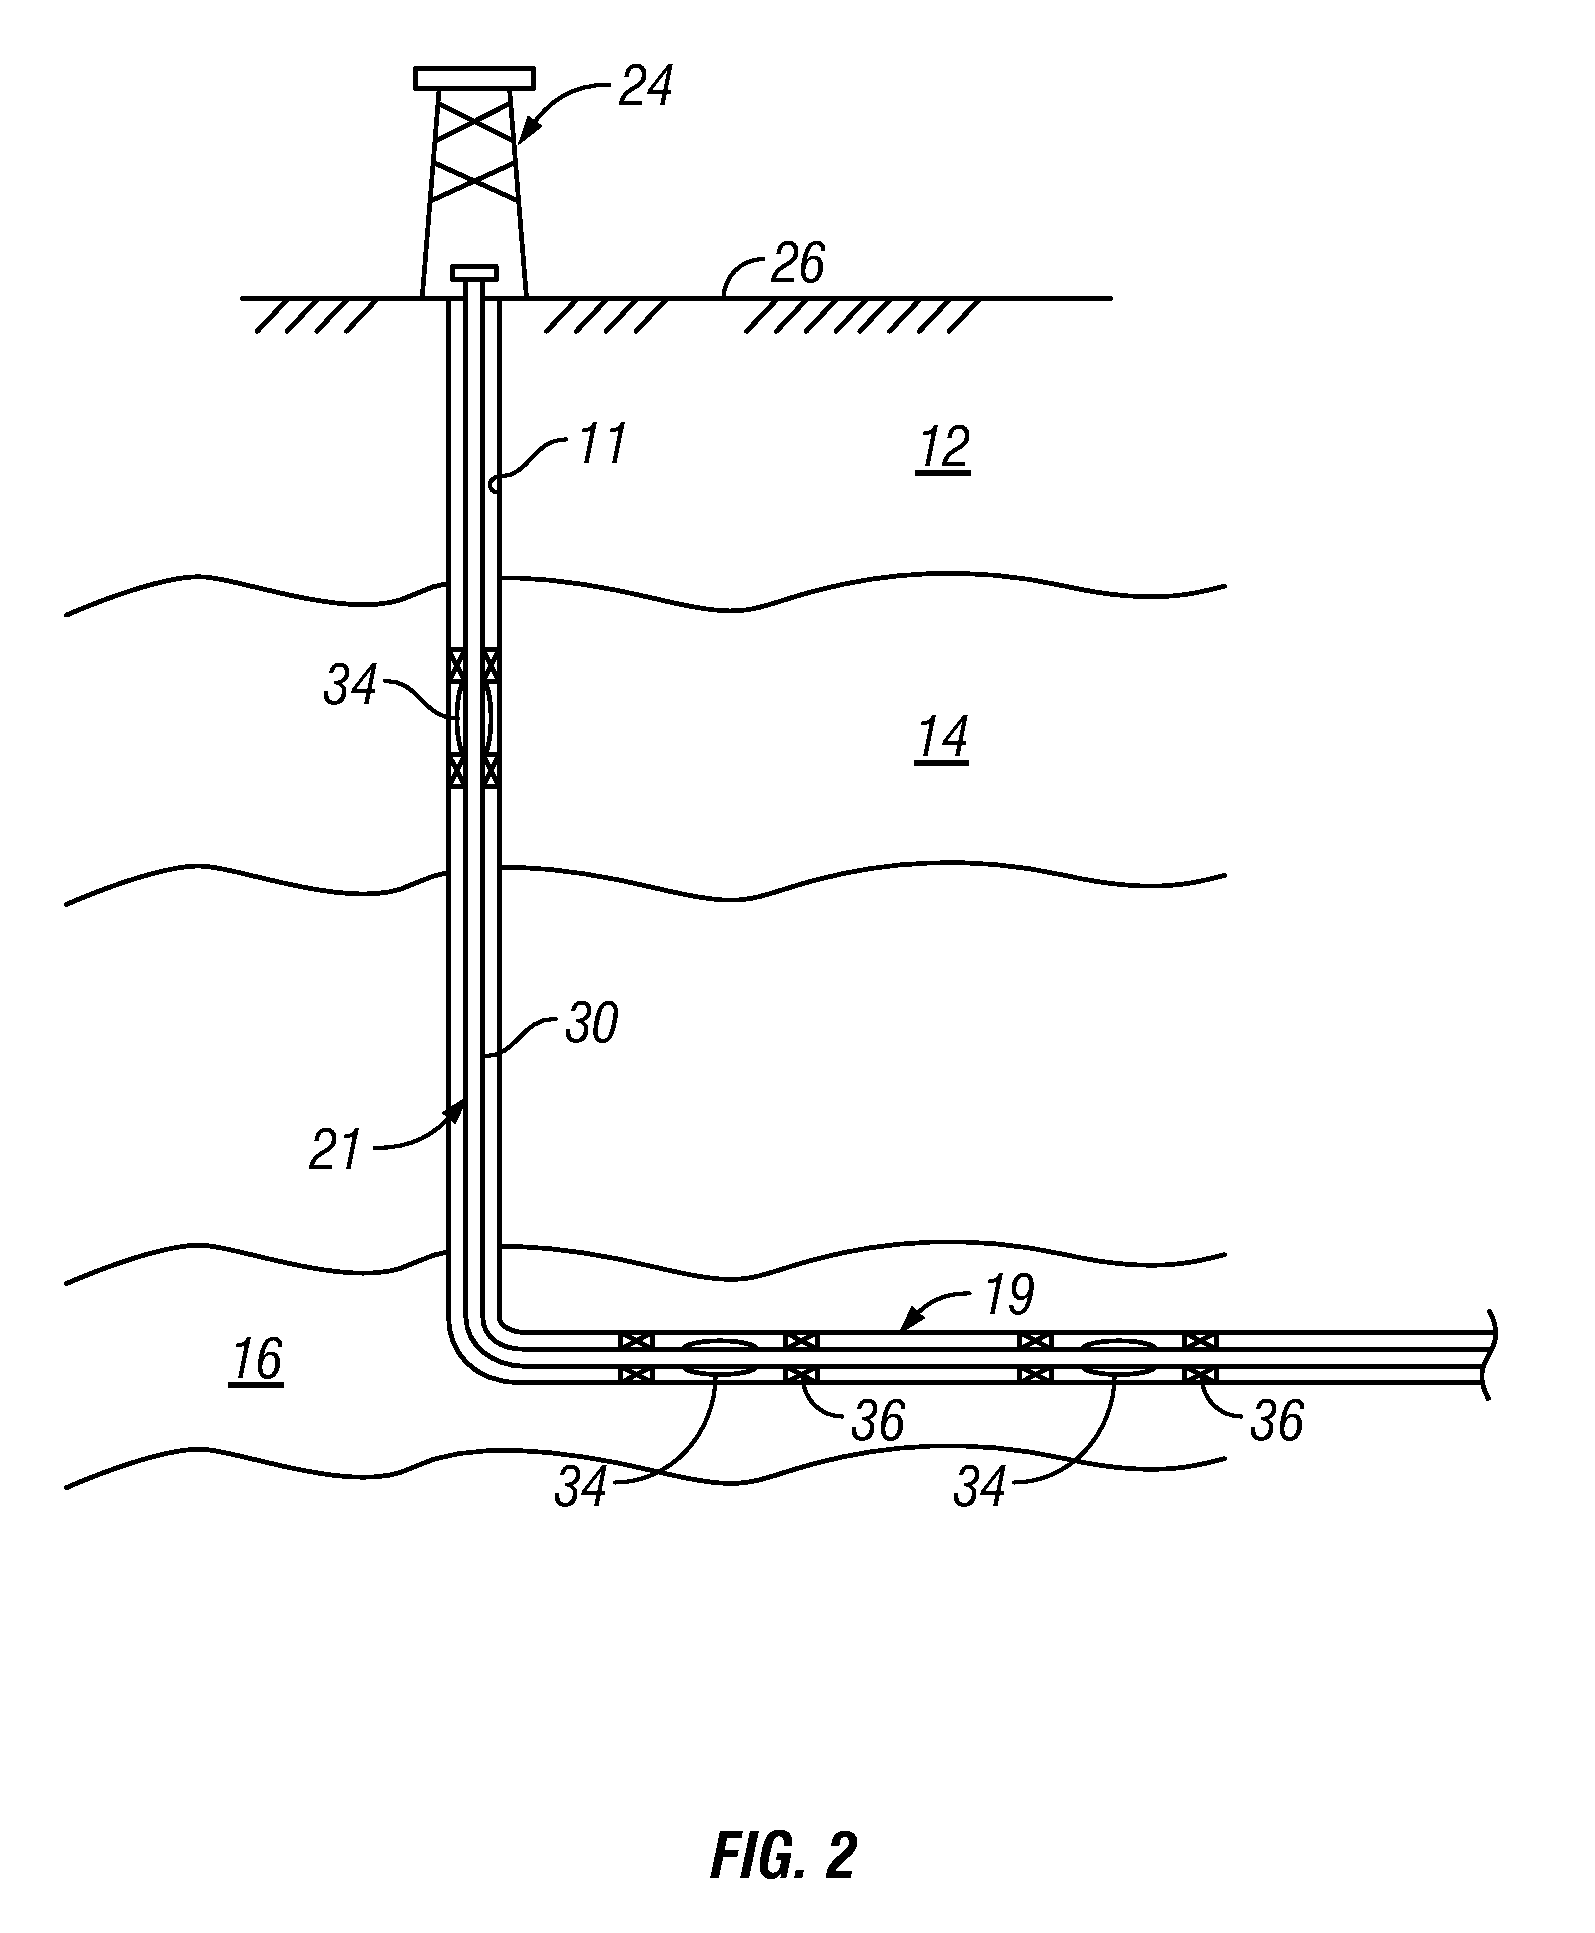 Water Absorbing Materials Used as an In-flow Control Device